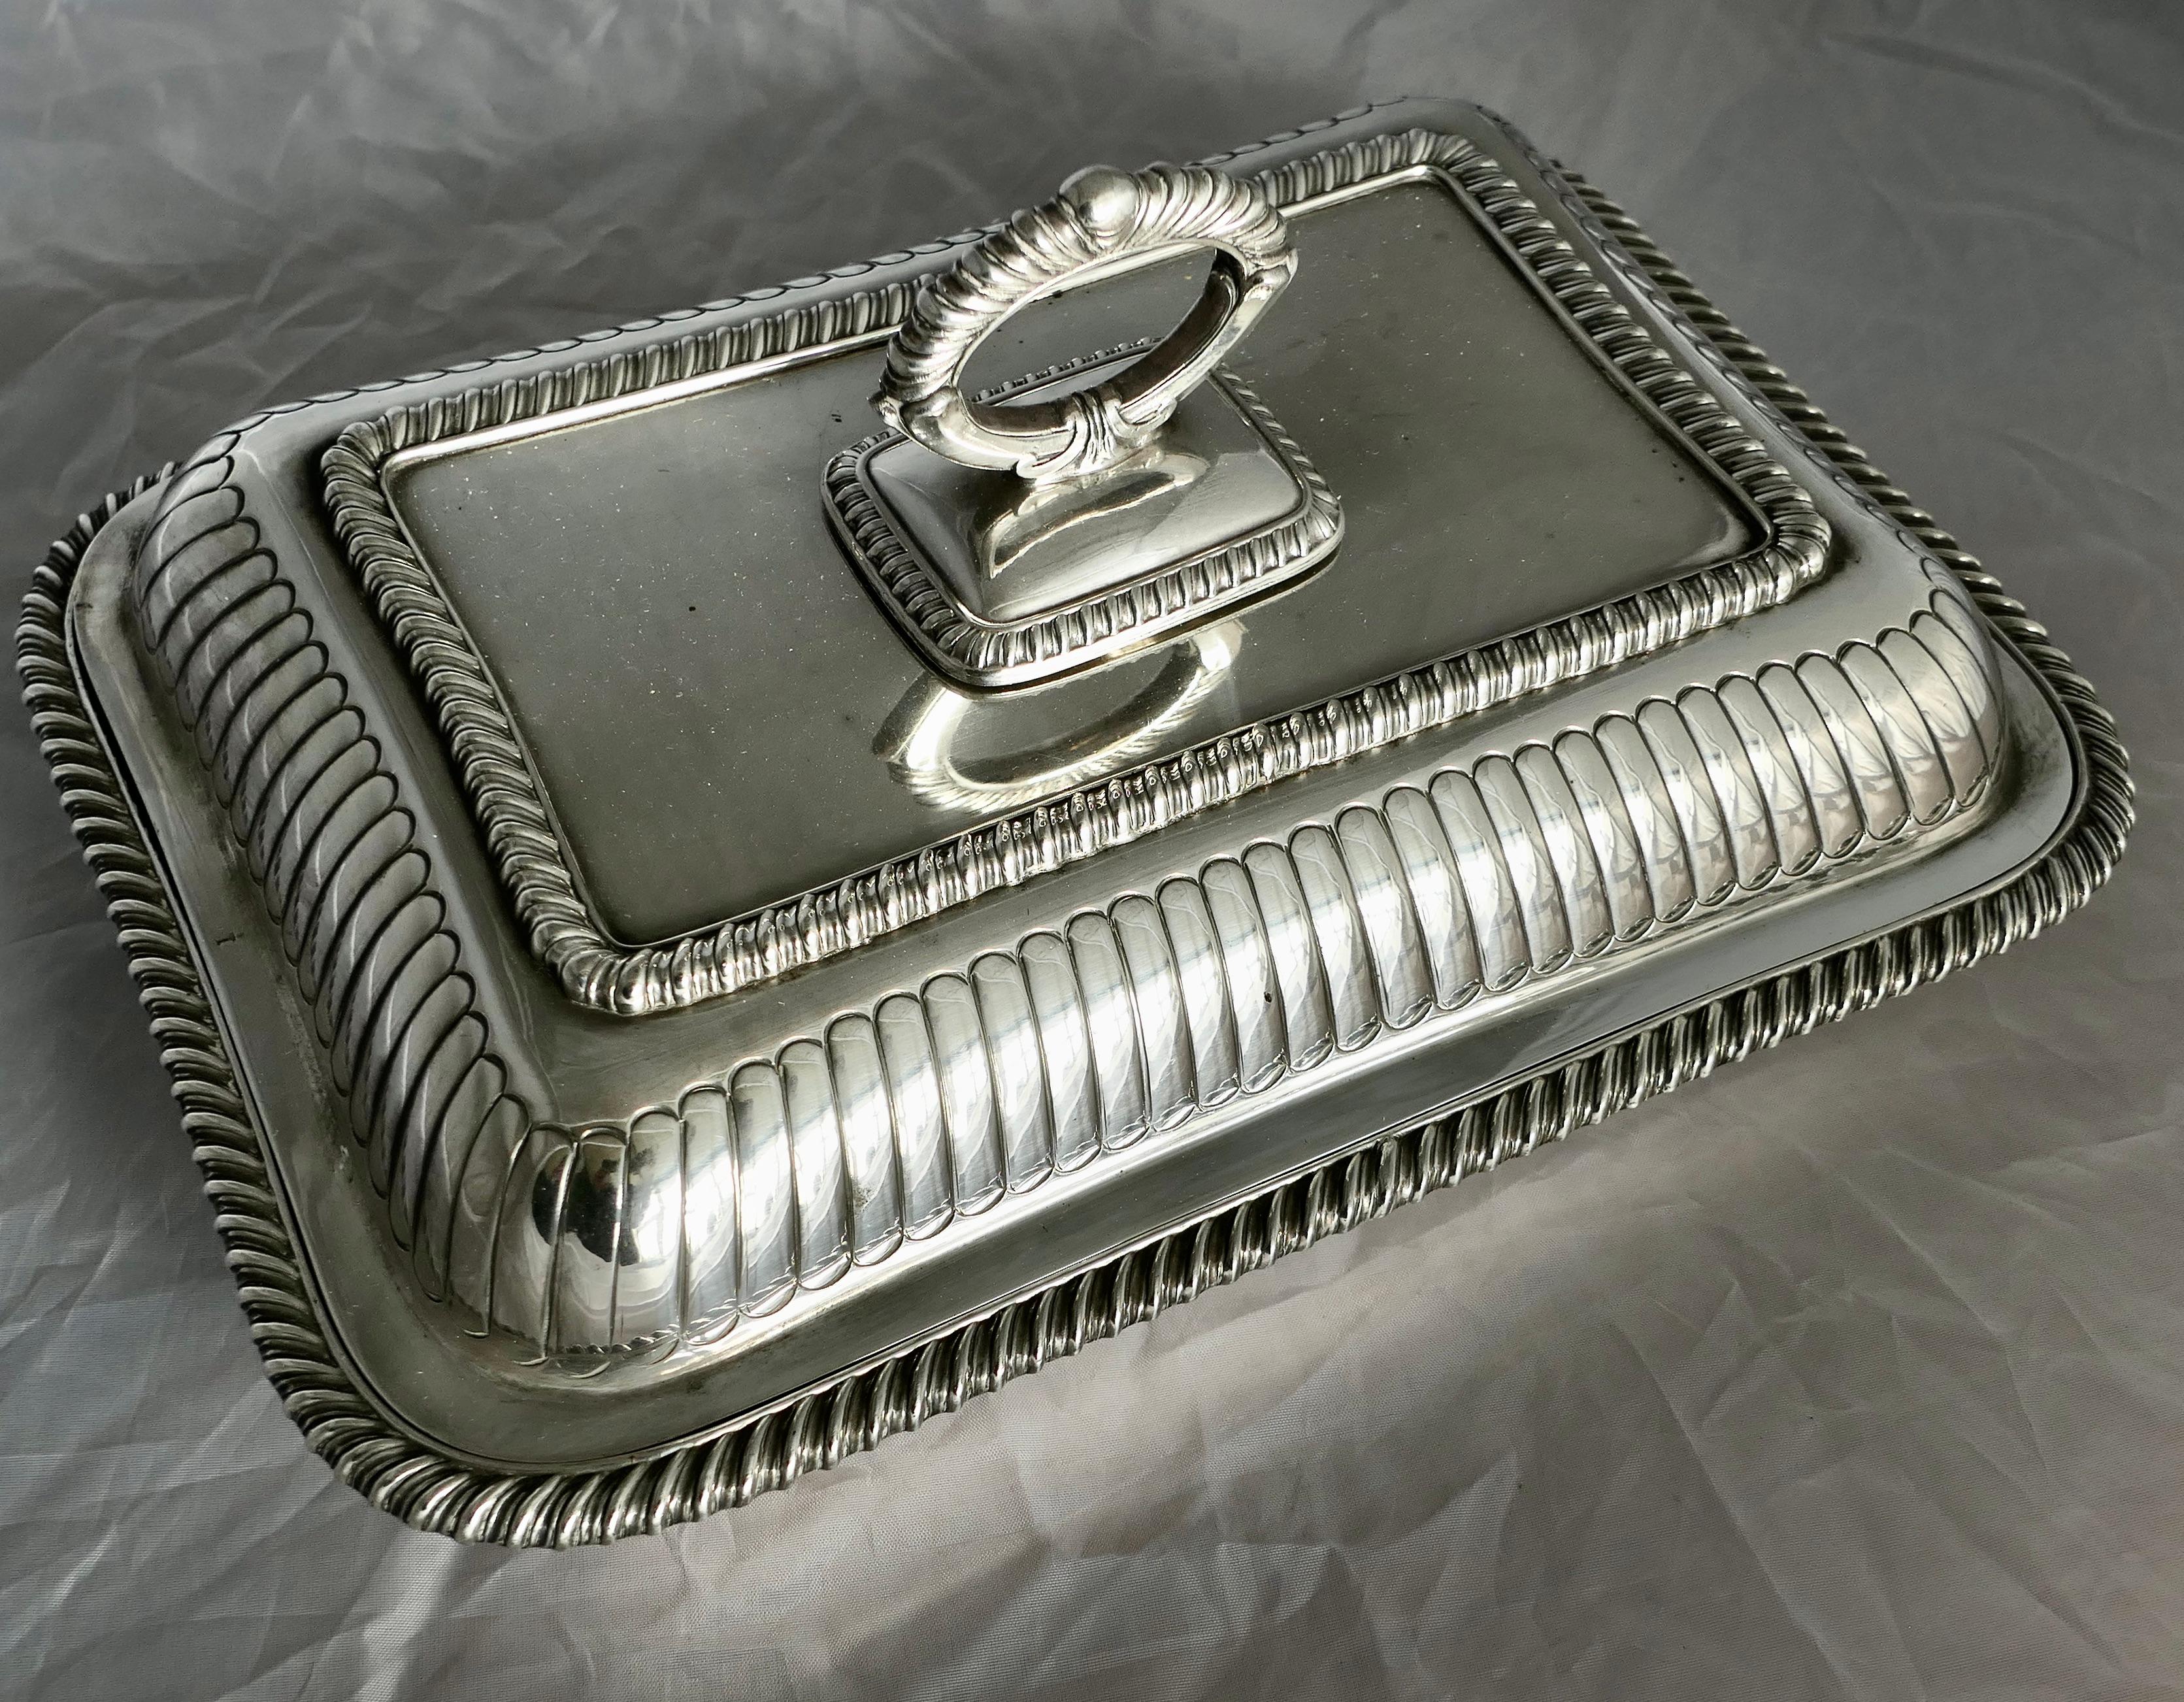 A Silver Plated Entree Dish  by Brook and Son 


An antique Edwardian silver plated entree dish in superb quality silver plate, it has a removable lid and  handle.

The underside is fully marked in good used condition, the dish is 4” high, 11” long